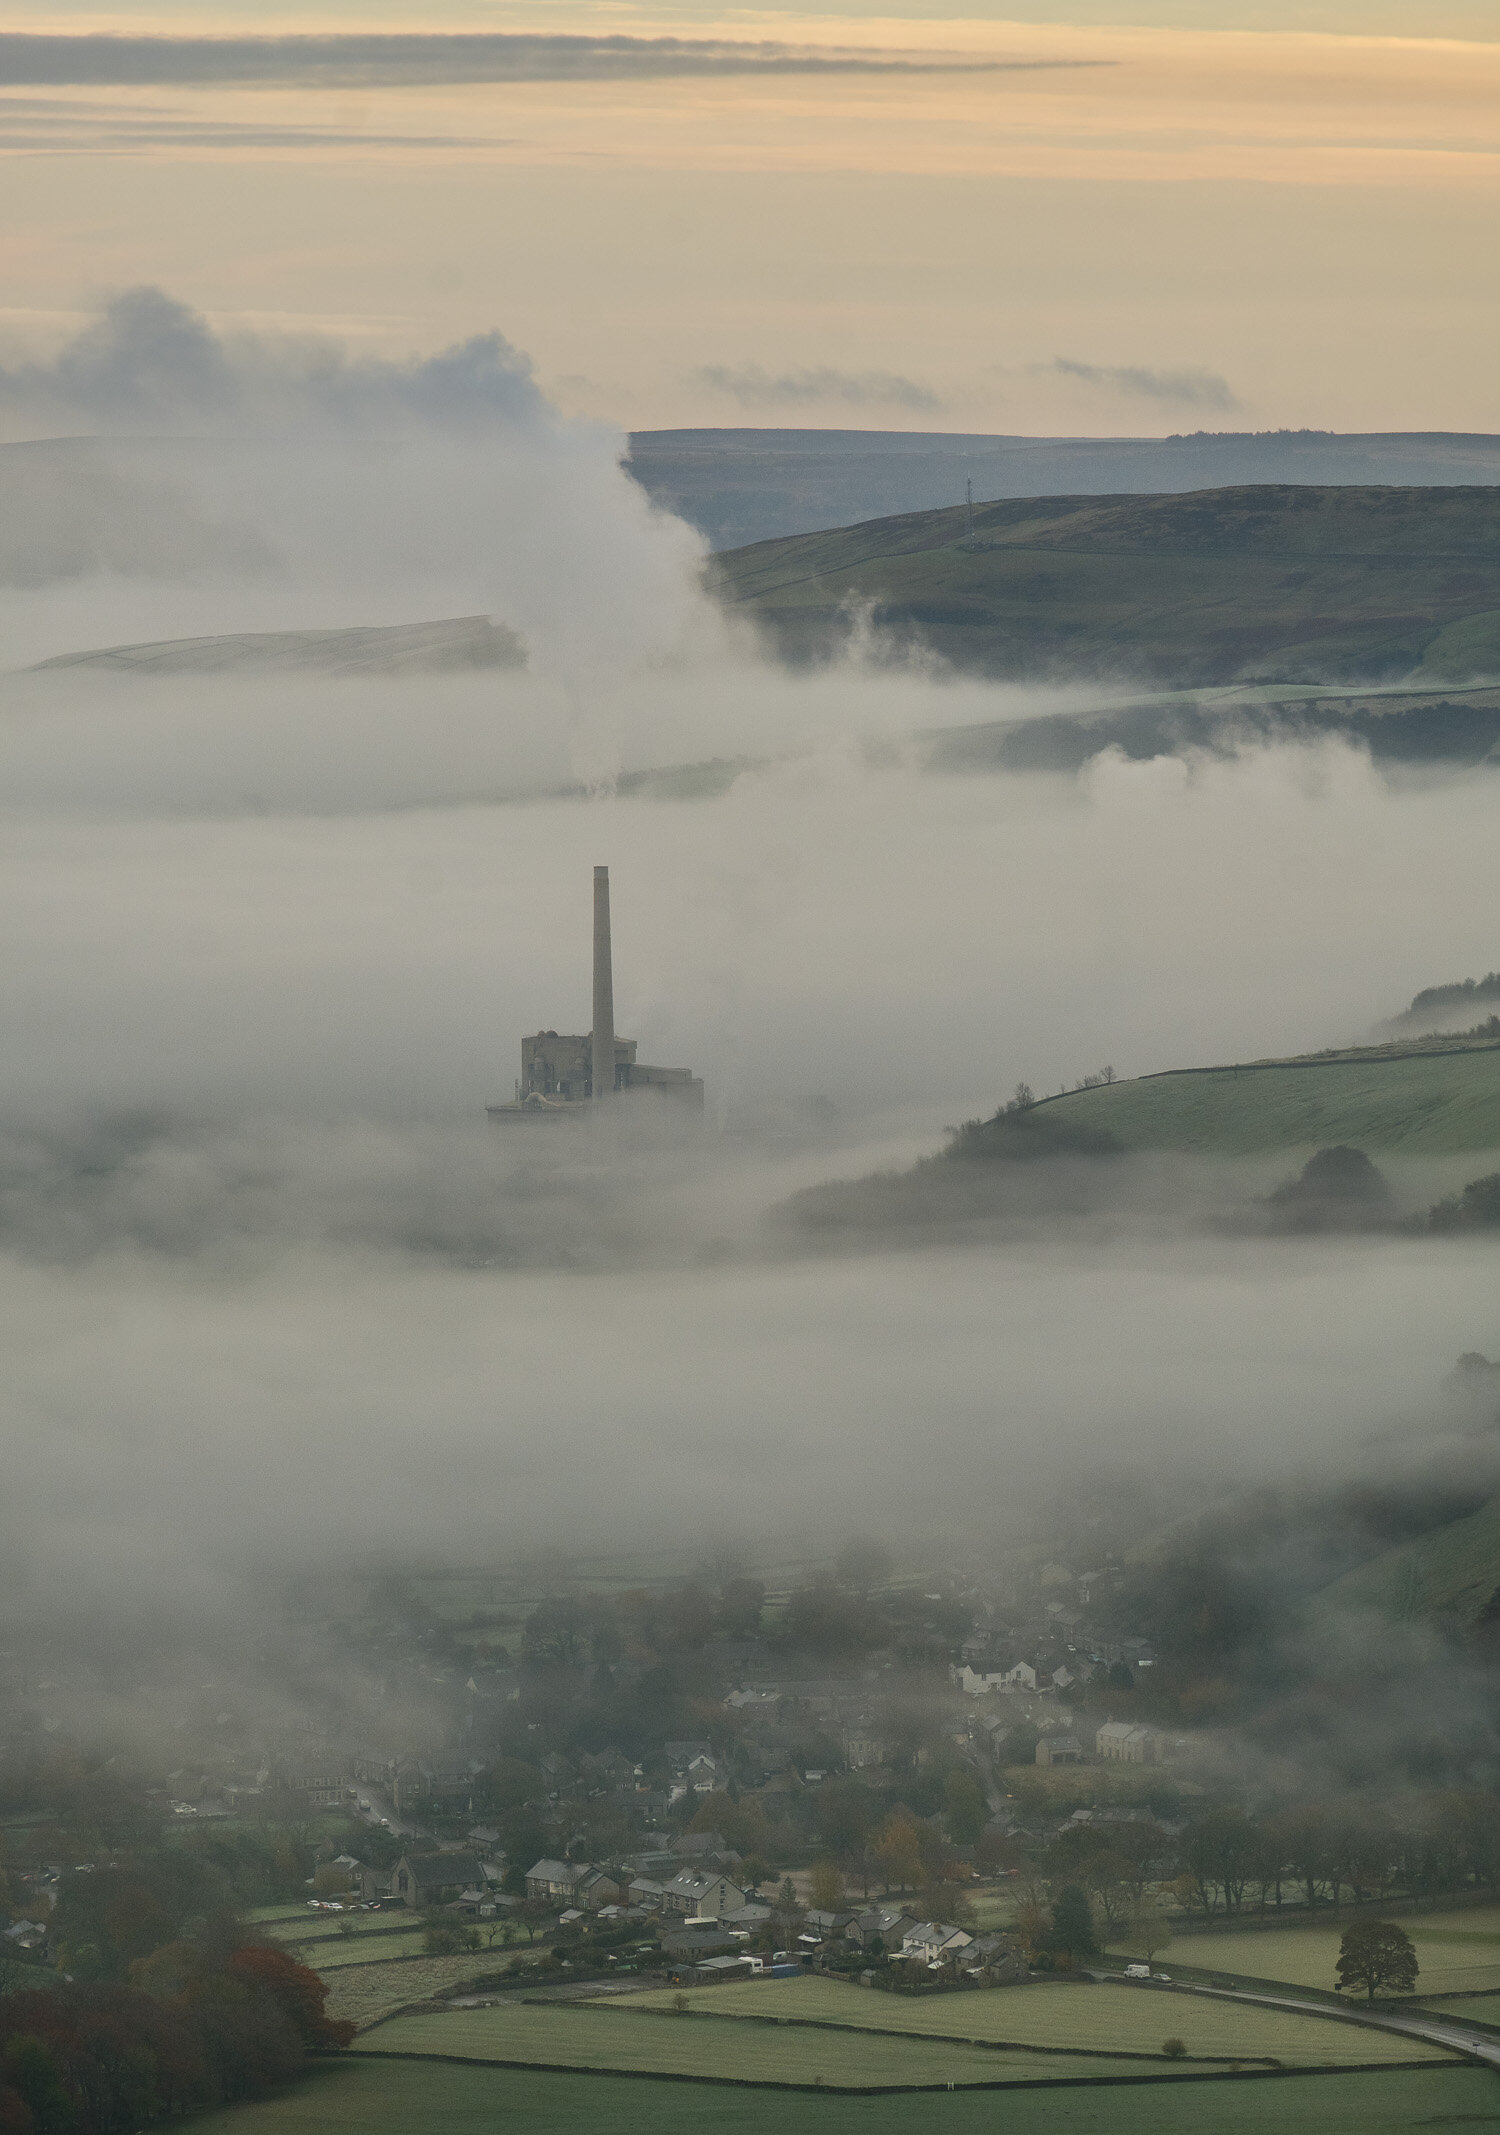 Castleton and Hope Valley Cement Works from Mam Tor, Derbyshire, England